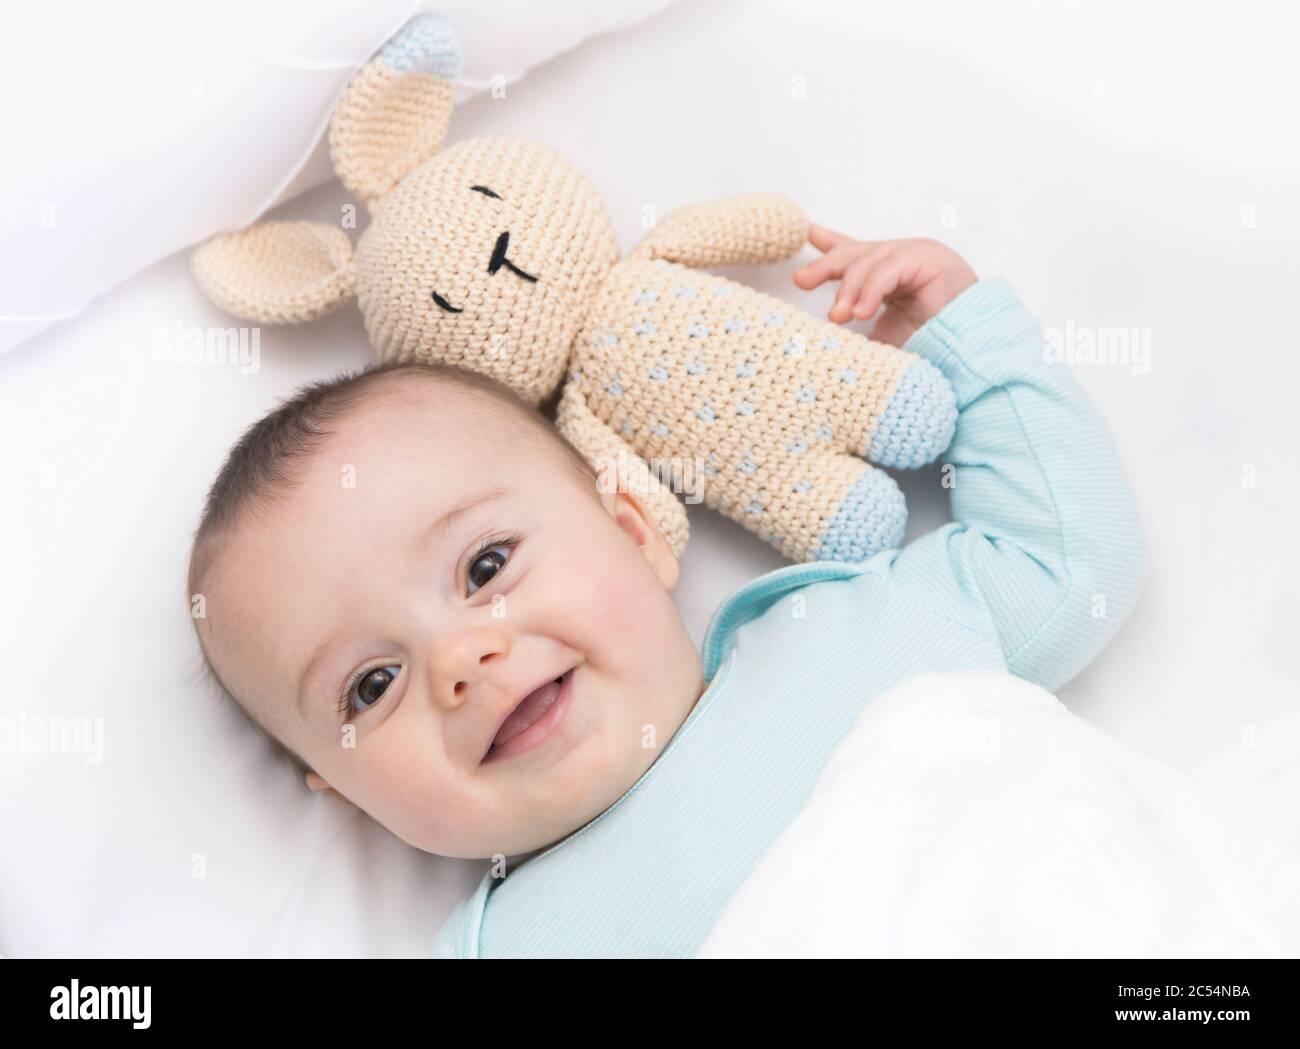 Happy baby newly awake in his crib and with his bunny doll. Light blue pajama and white bed sheets. Stock Photo